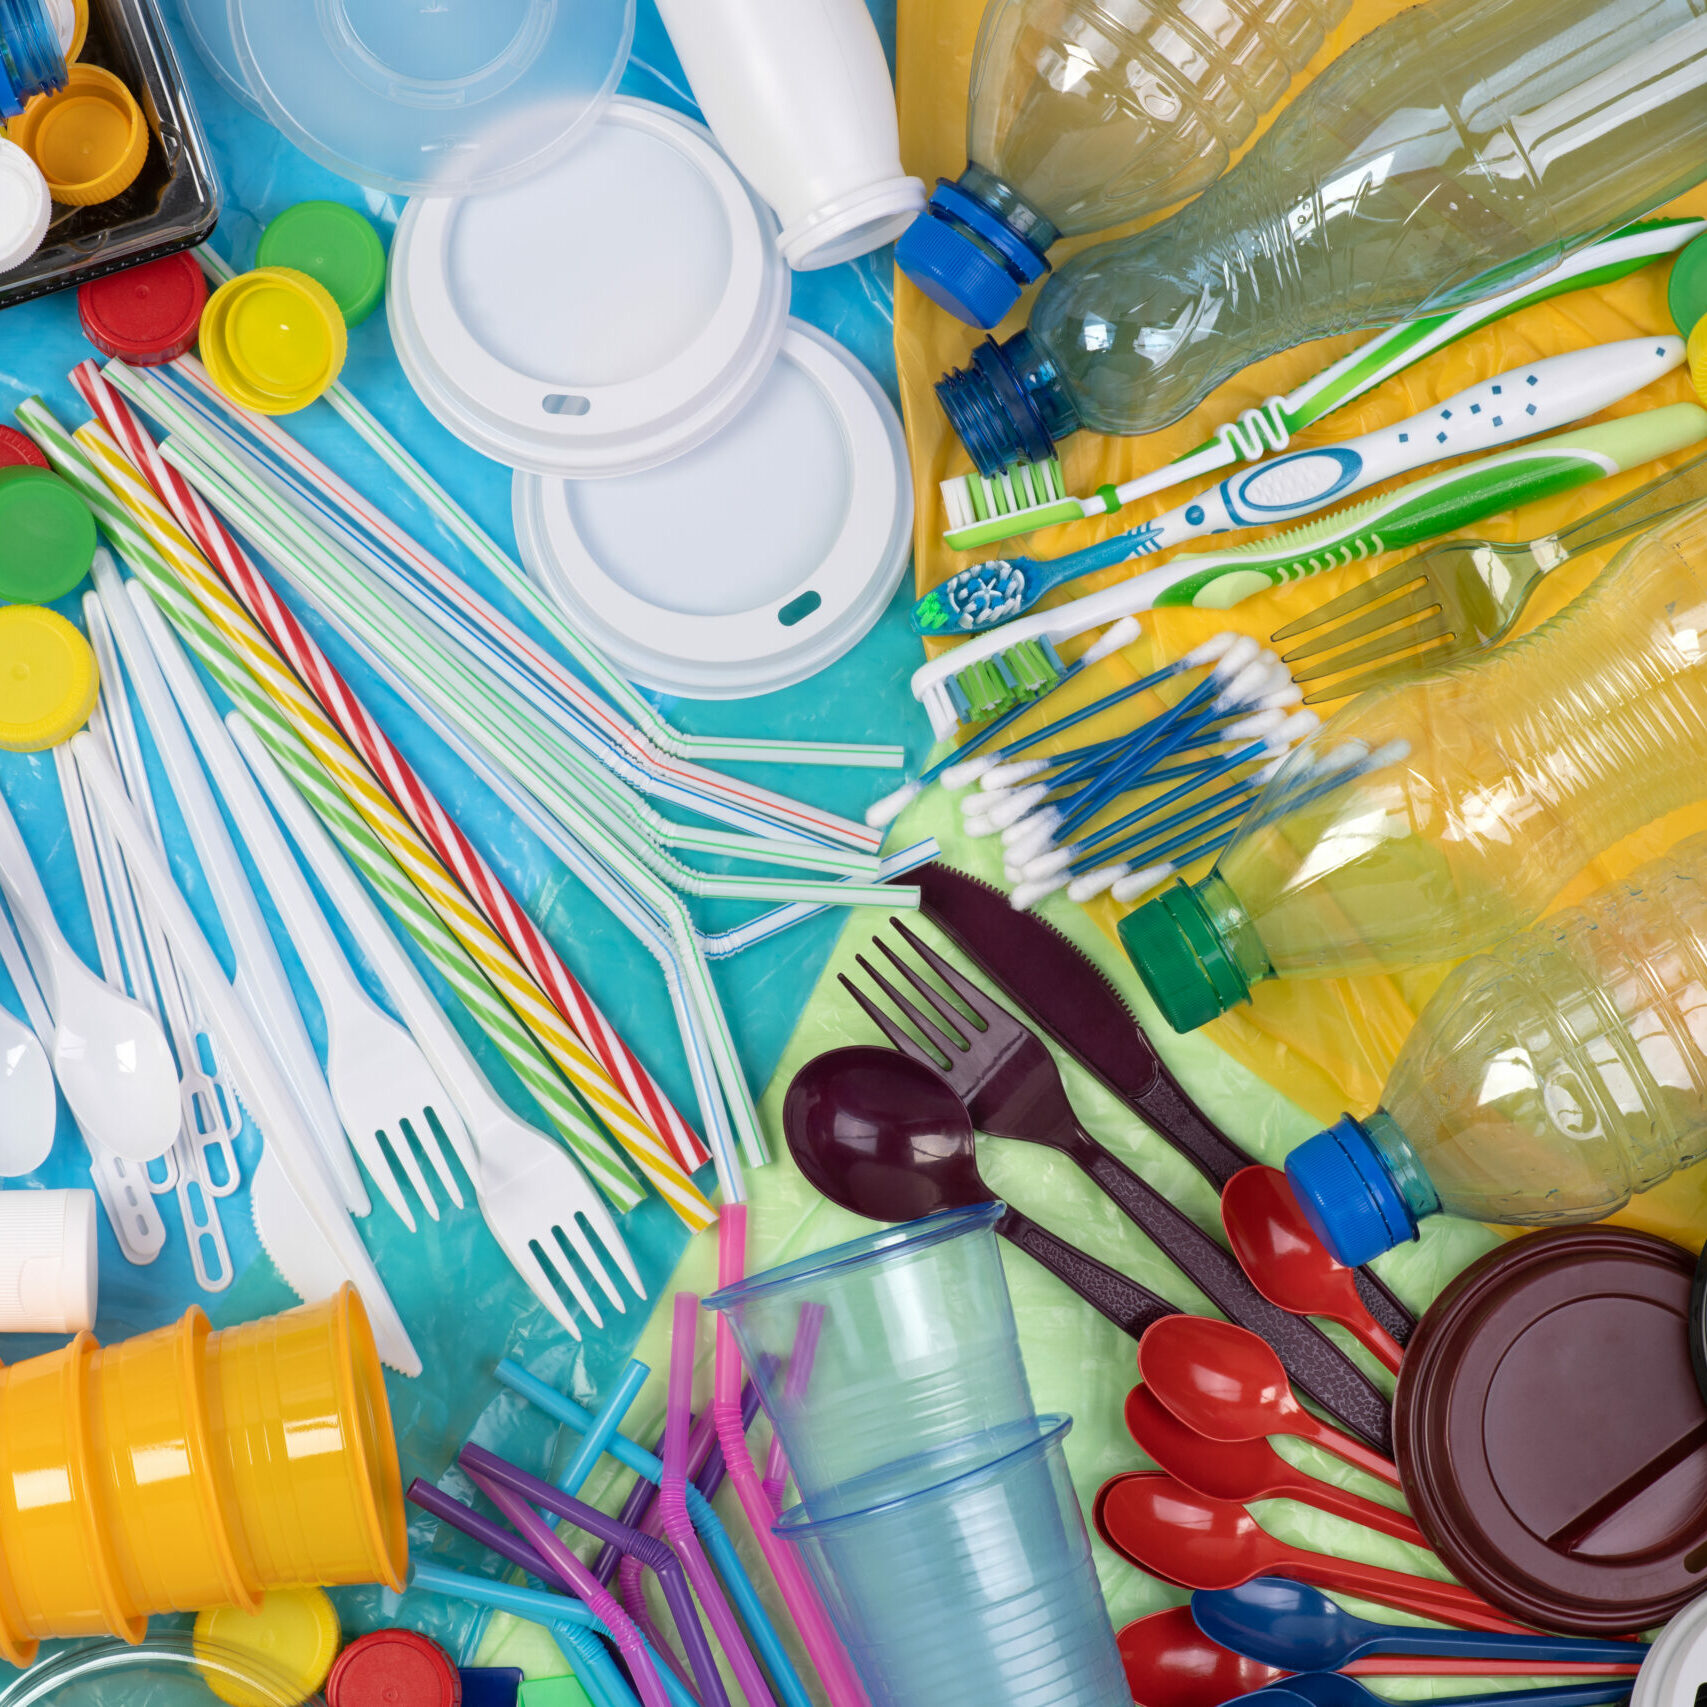 Disposable,Single,Use,Plastic,Objects,Such,As,Bottles,,Cups,,Forks,